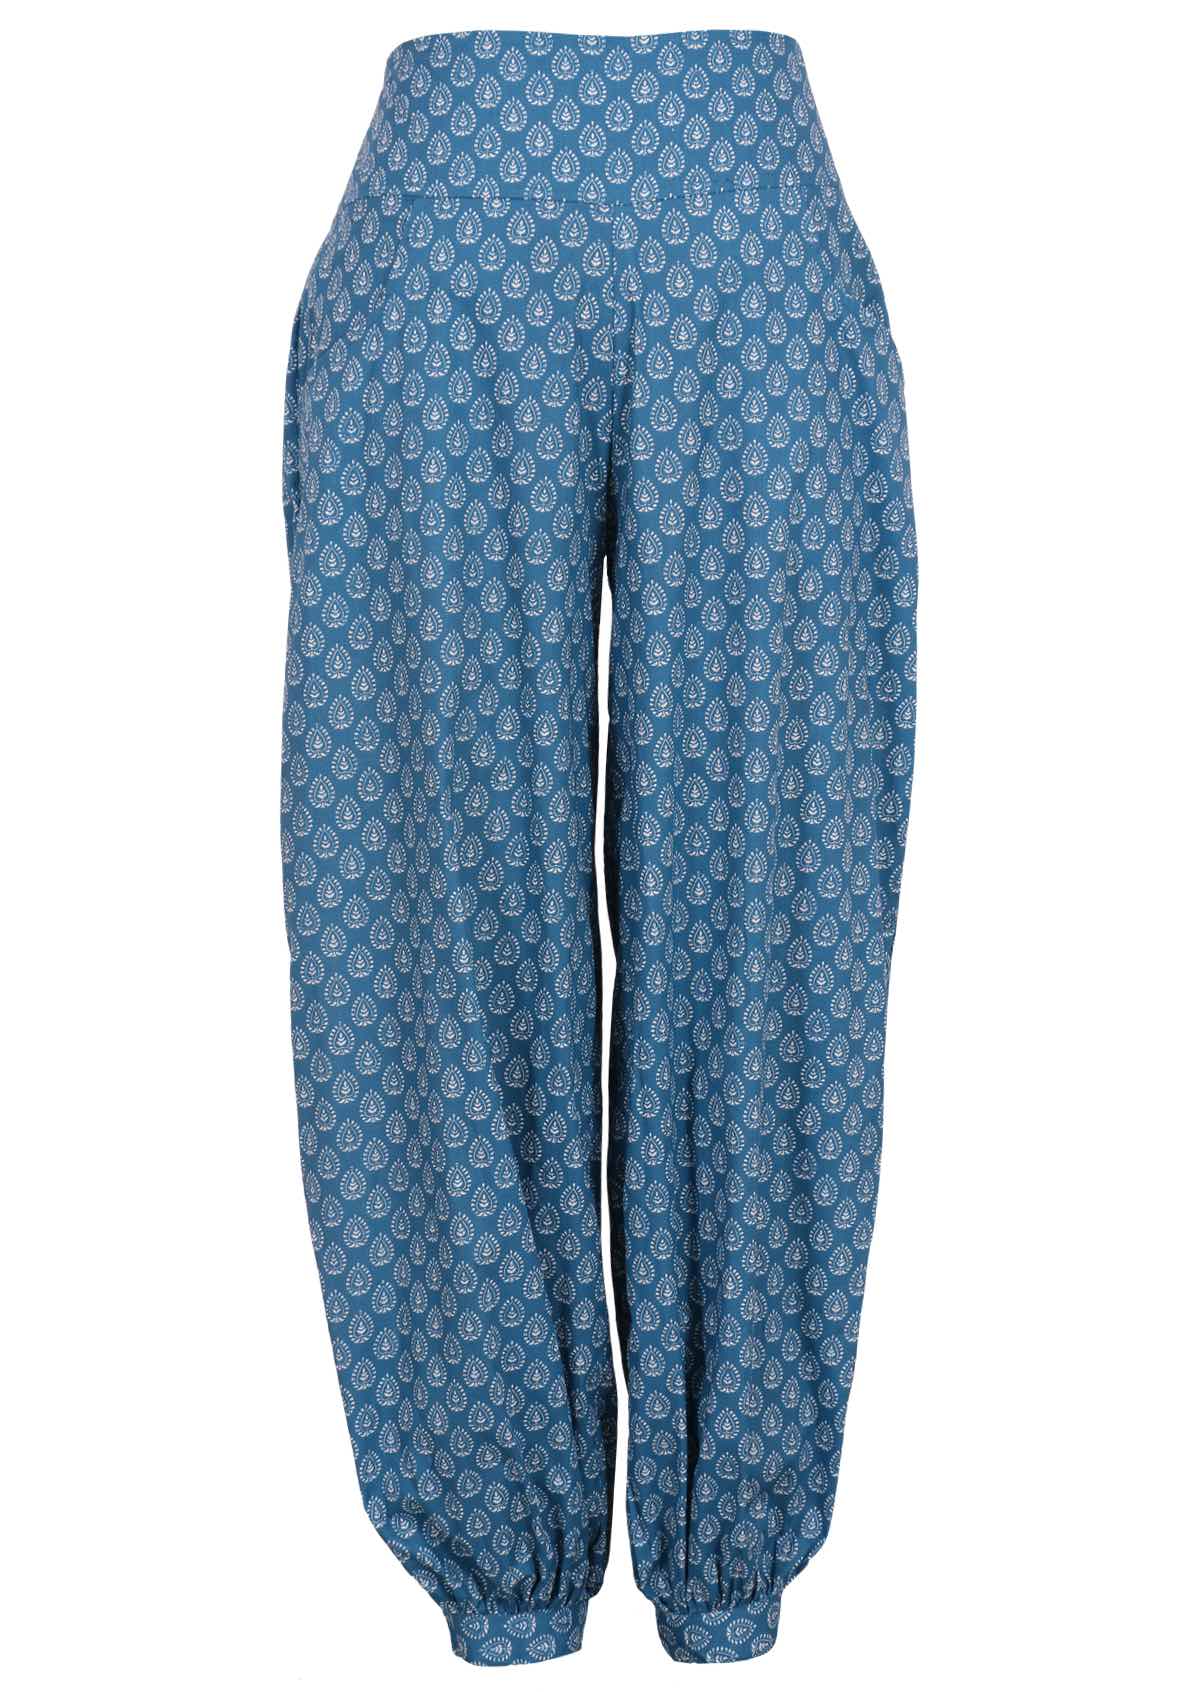 Blue cotton pants with cuffed ankles